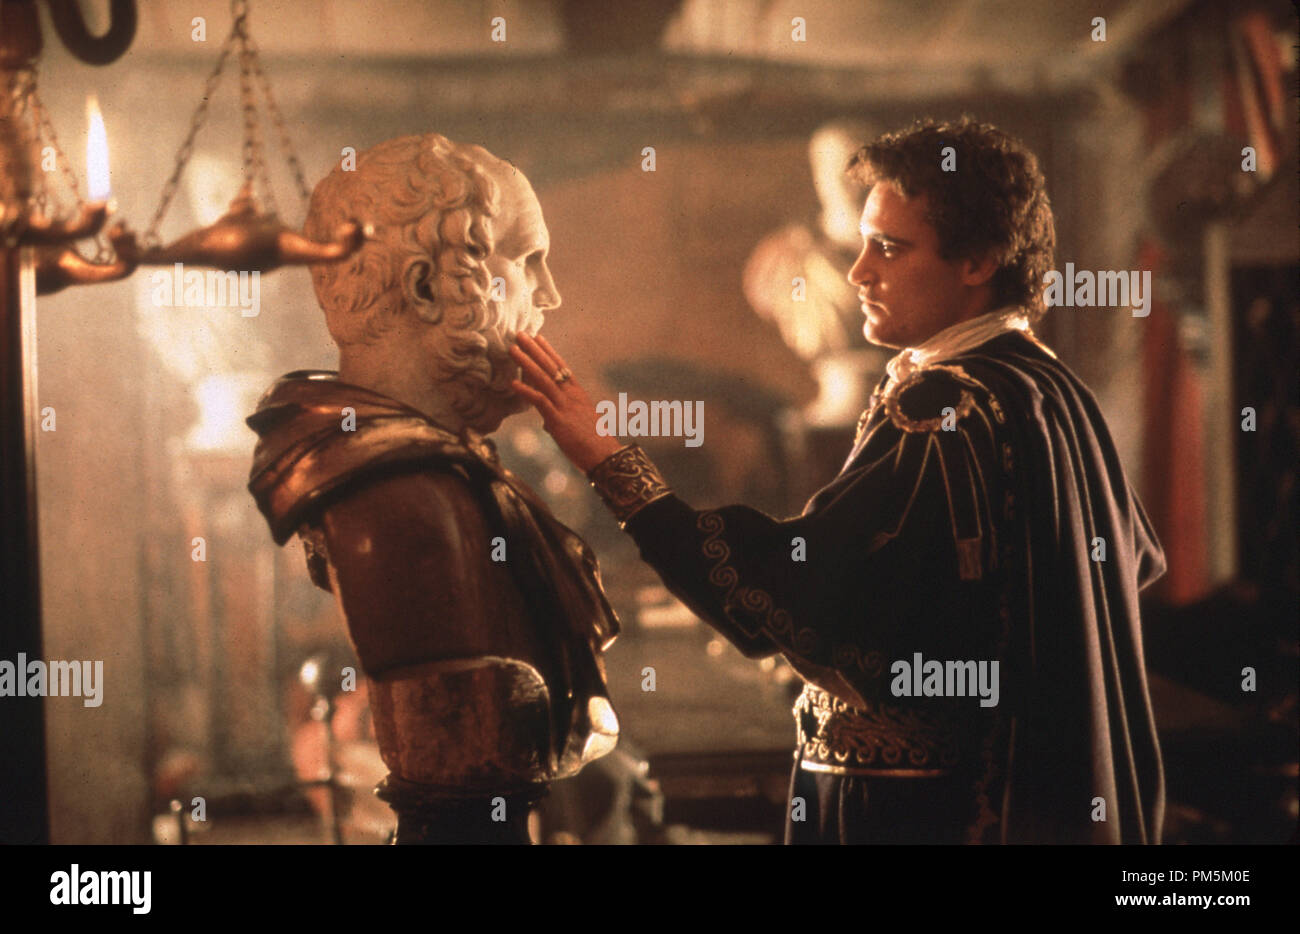 Film Still / Publicity Stills from 'Gladiator' Joaquin Phoenix © 2000 Universal / DreamWorks Photo Credit: Jaap Buitendijk File Reference # 30846508THA  For Editorial Use Only -  All Rights Reserved Stock Photo